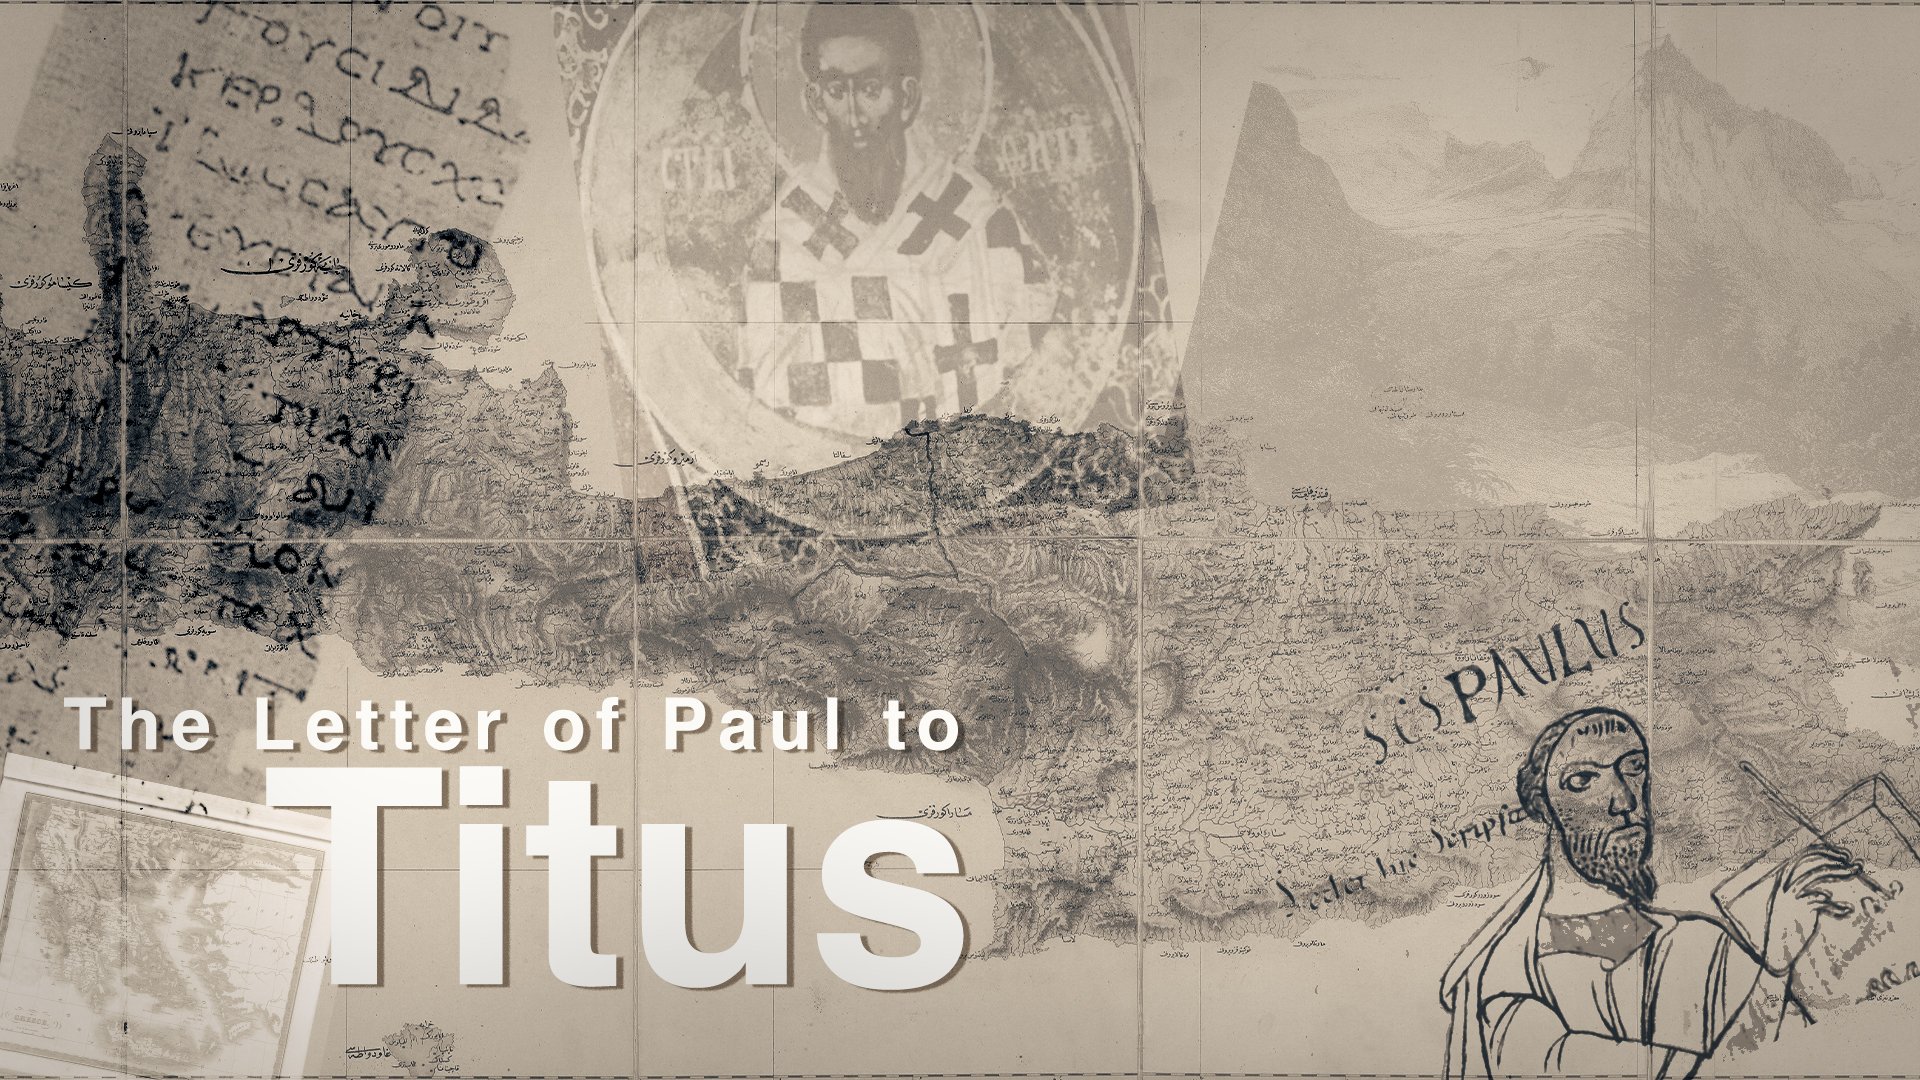 The Letter of Paul to Titus